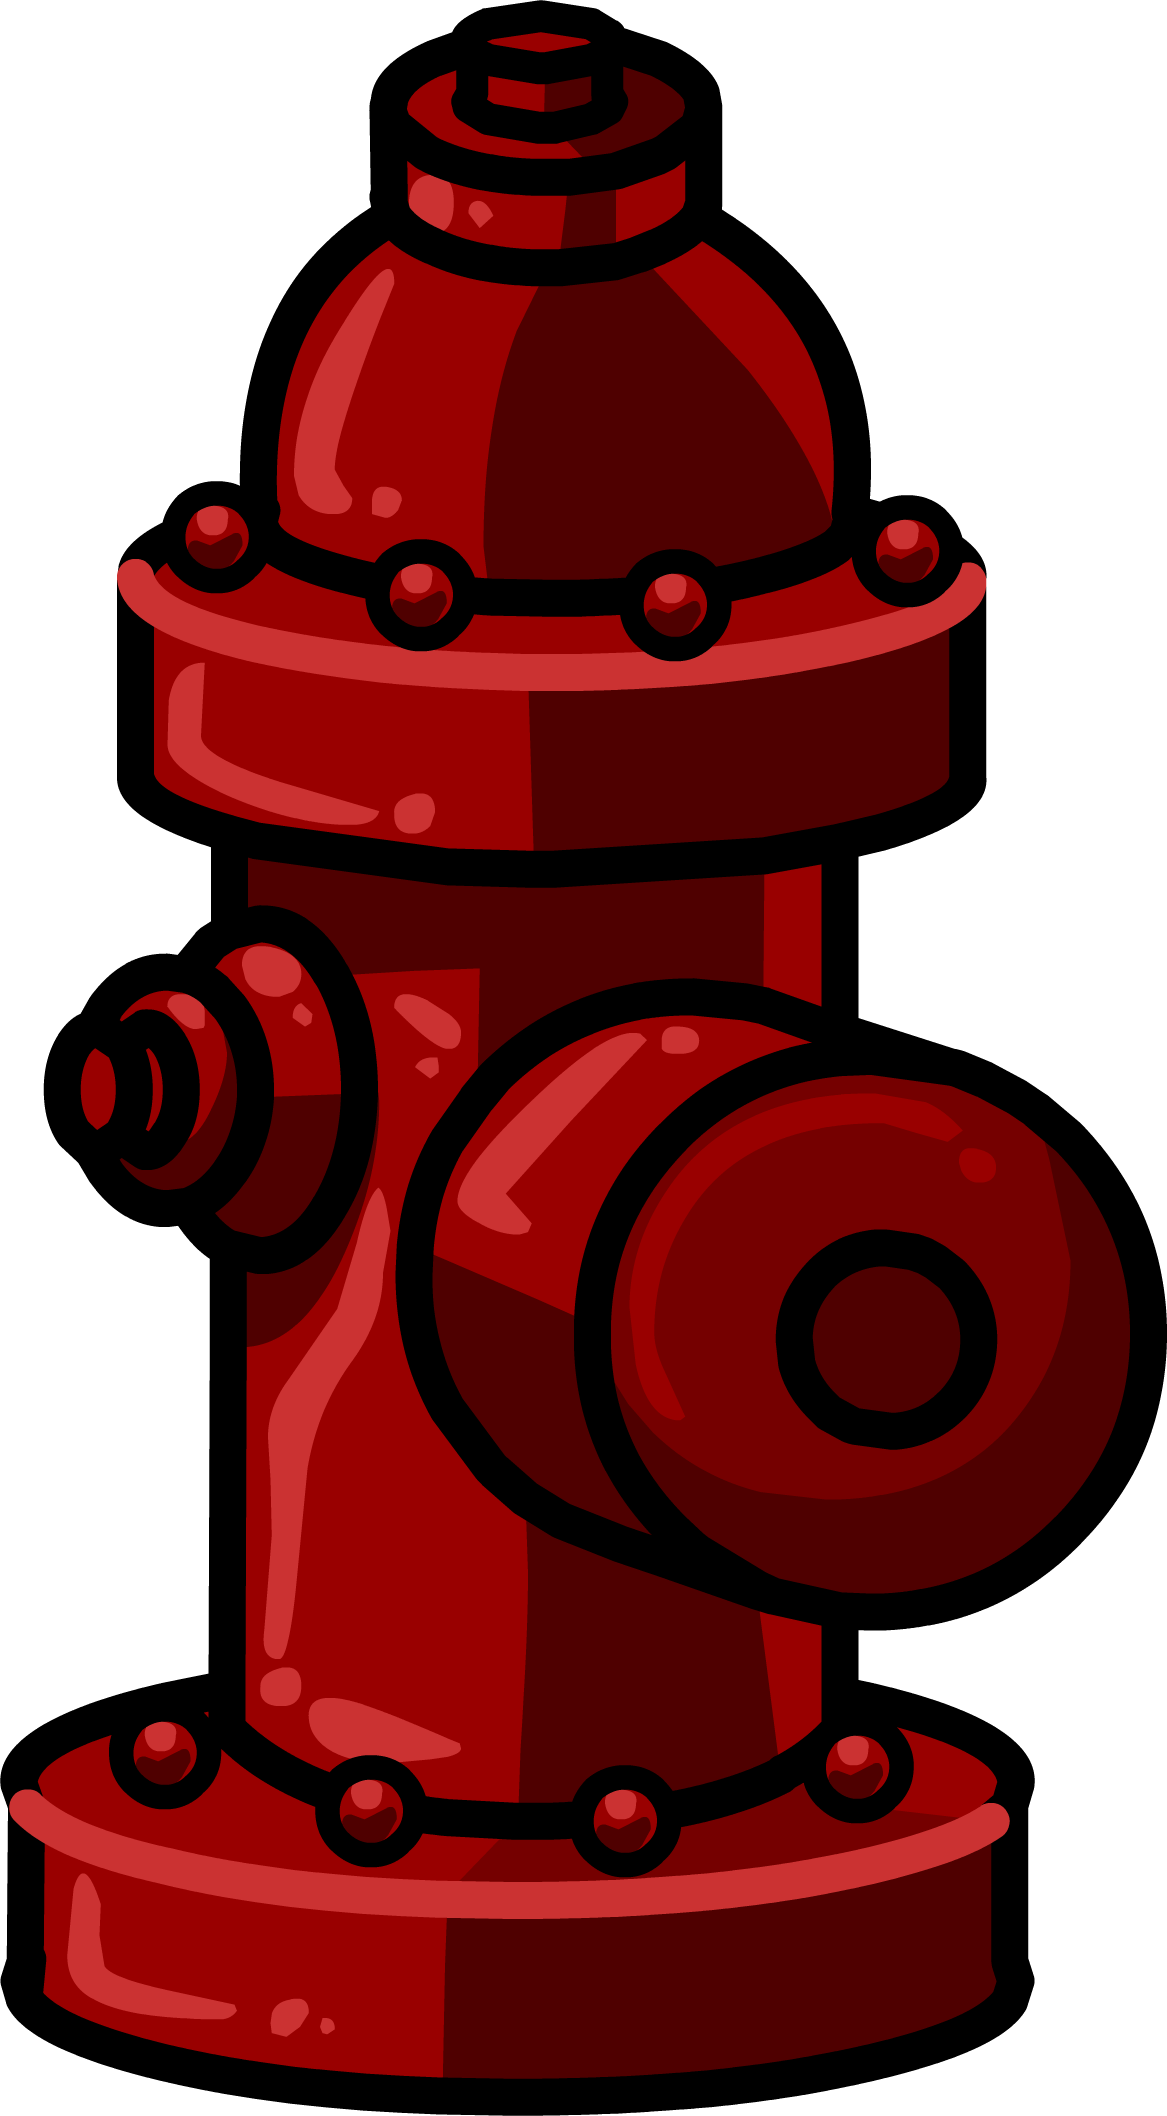 Fire Hydrant Free Download Image PNG Image